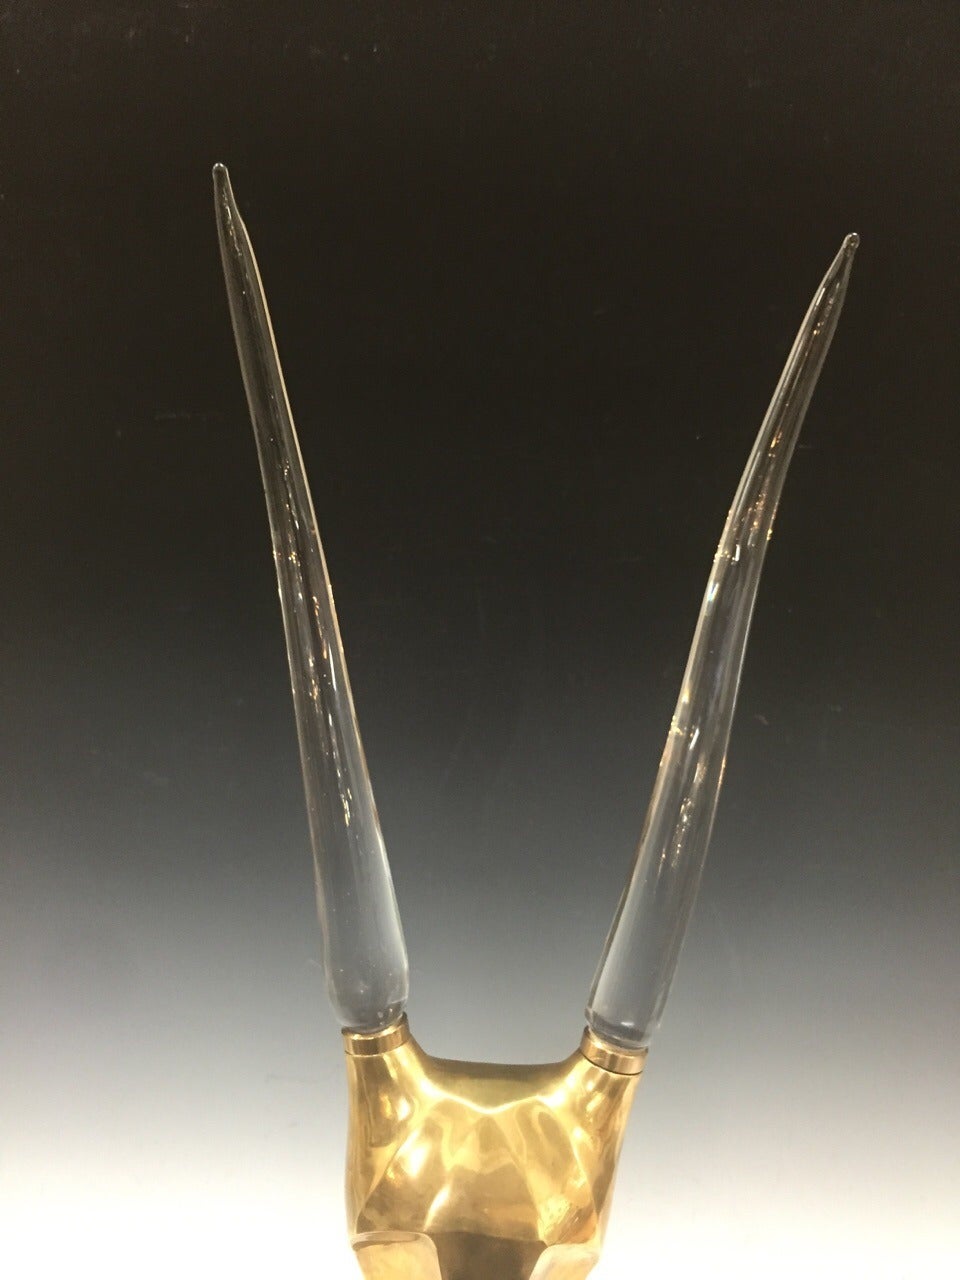 Modernistic Brass and Glass Gazelle Head Sculpture In Excellent Condition For Sale In Mount Penn, PA